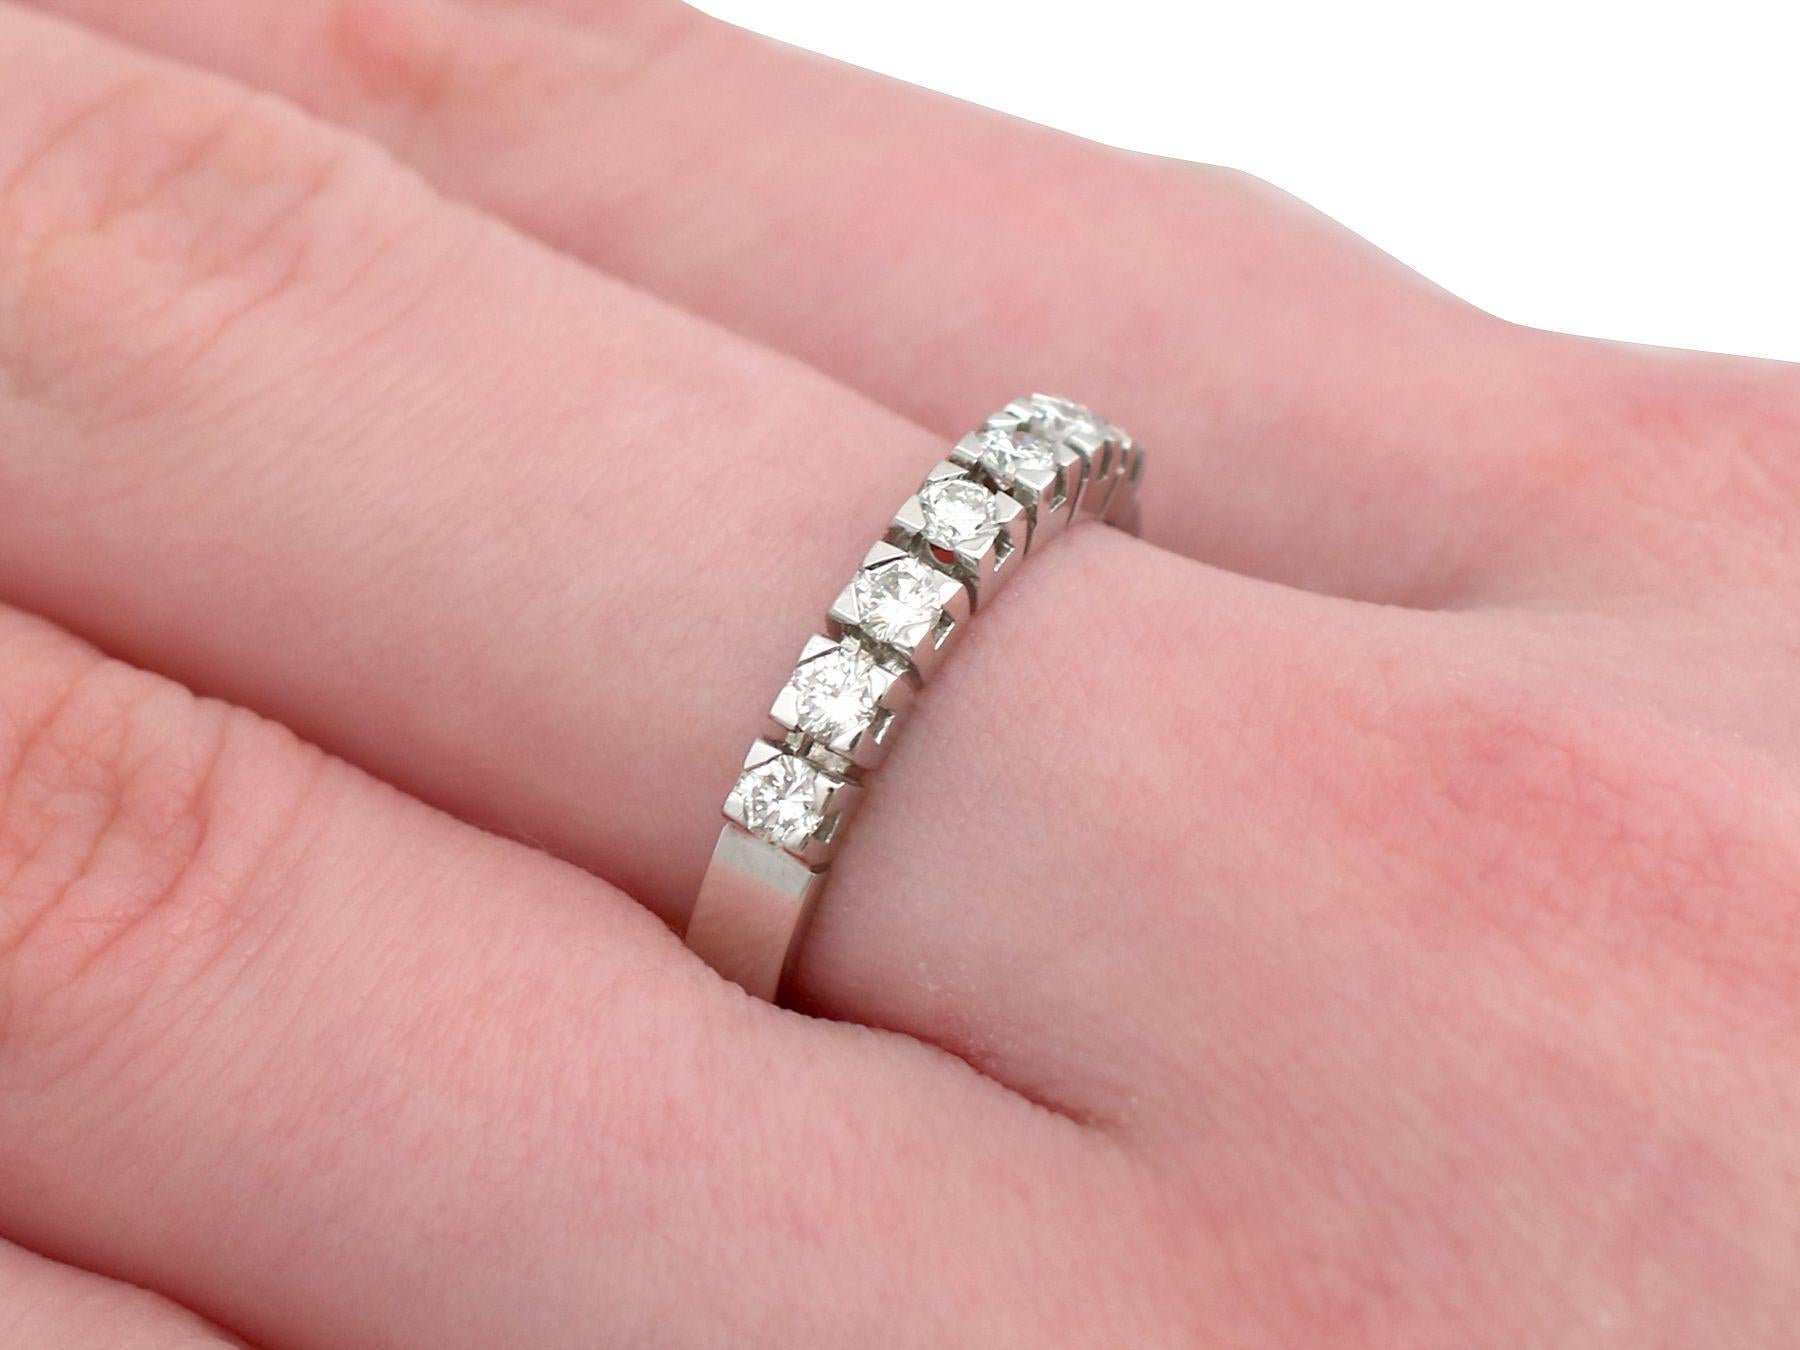 1970s Diamond and White Gold Half Eternity Ring In Excellent Condition For Sale In Jesmond, Newcastle Upon Tyne